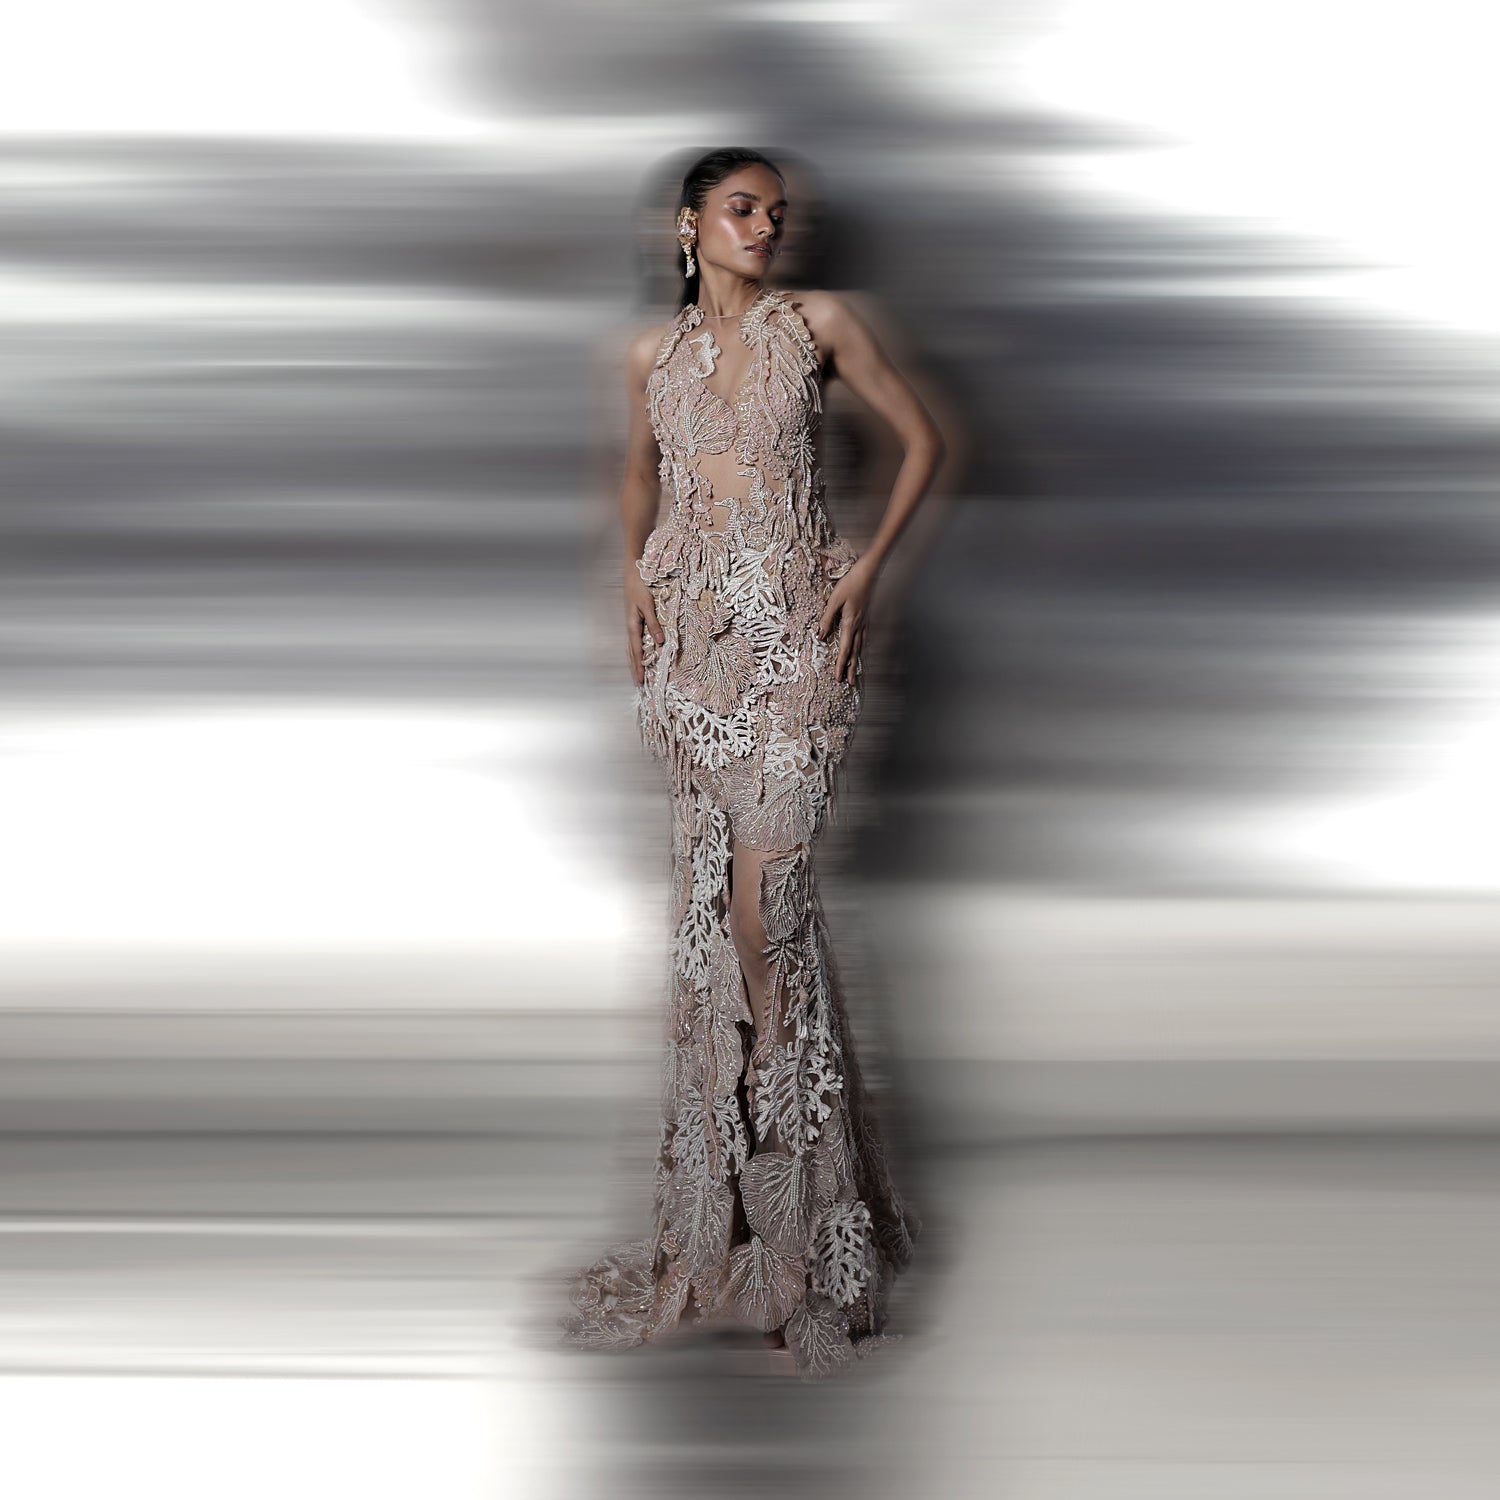 3d embroidered sequins gown inspired by the calony of coral reef and the play of sunlight falling on the ocean floor teamed with can-can skirt. The look is a perfect proposition of elegance and style, classic and modern. #abhisheksharma #fashiondesignerabhisheksharma #reef #redcarpet #shortdress #abhishekstudio #lfw #fdci 